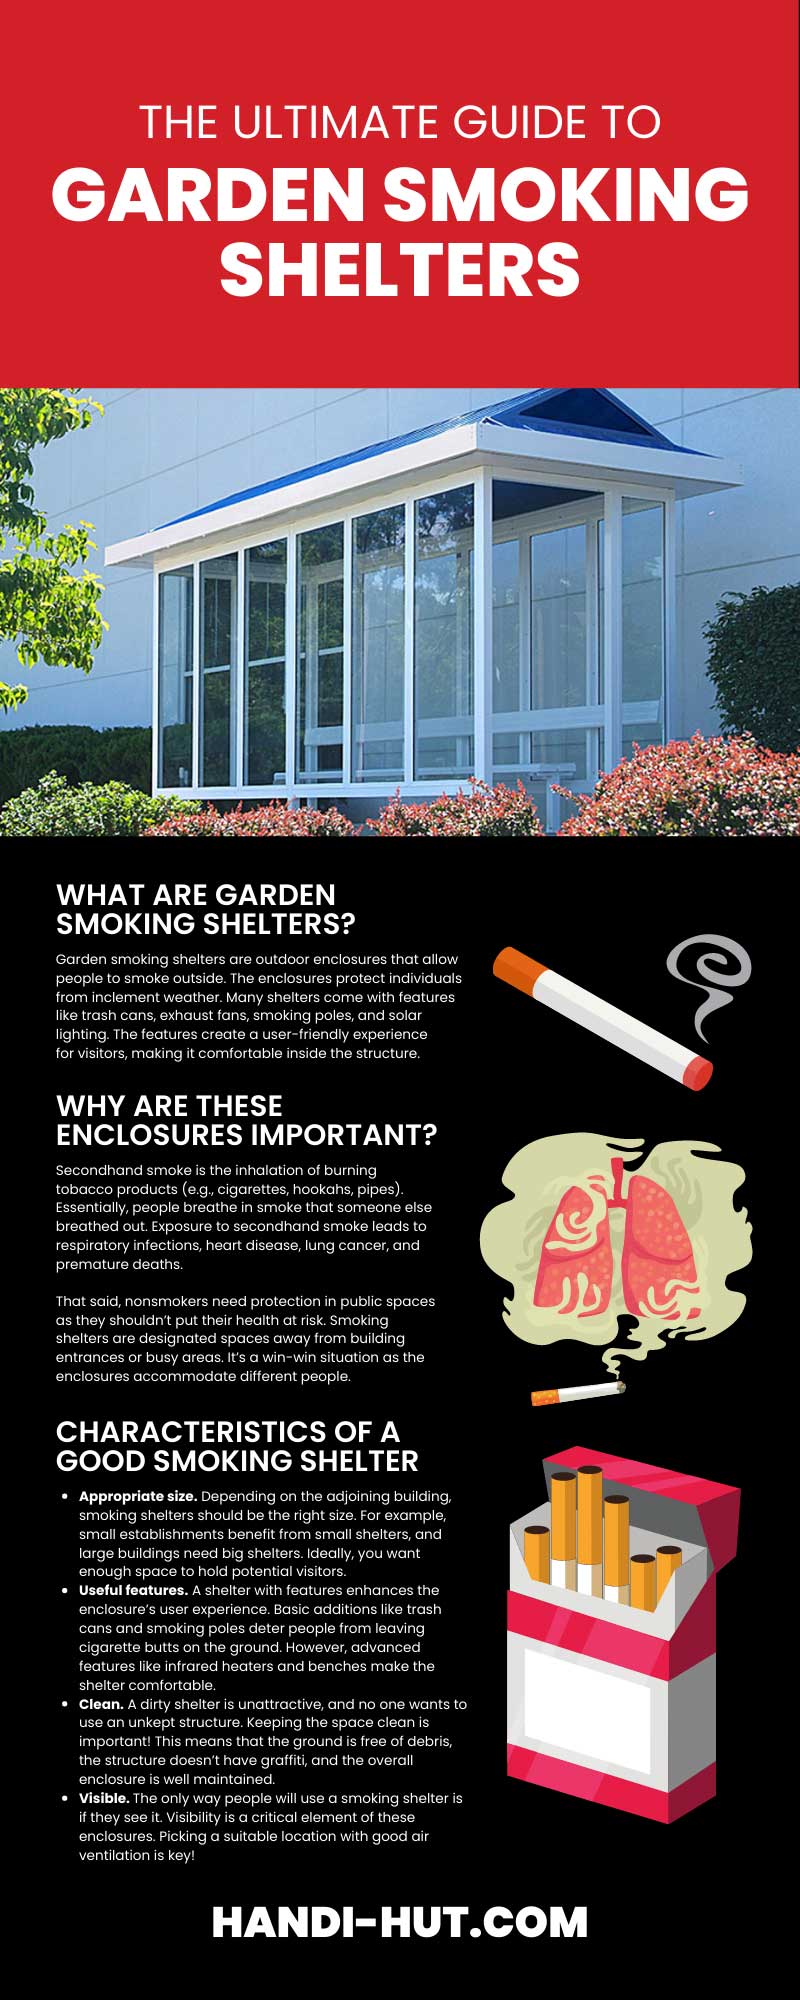 The Ultimate Guide to Garden Smoking Shelters 